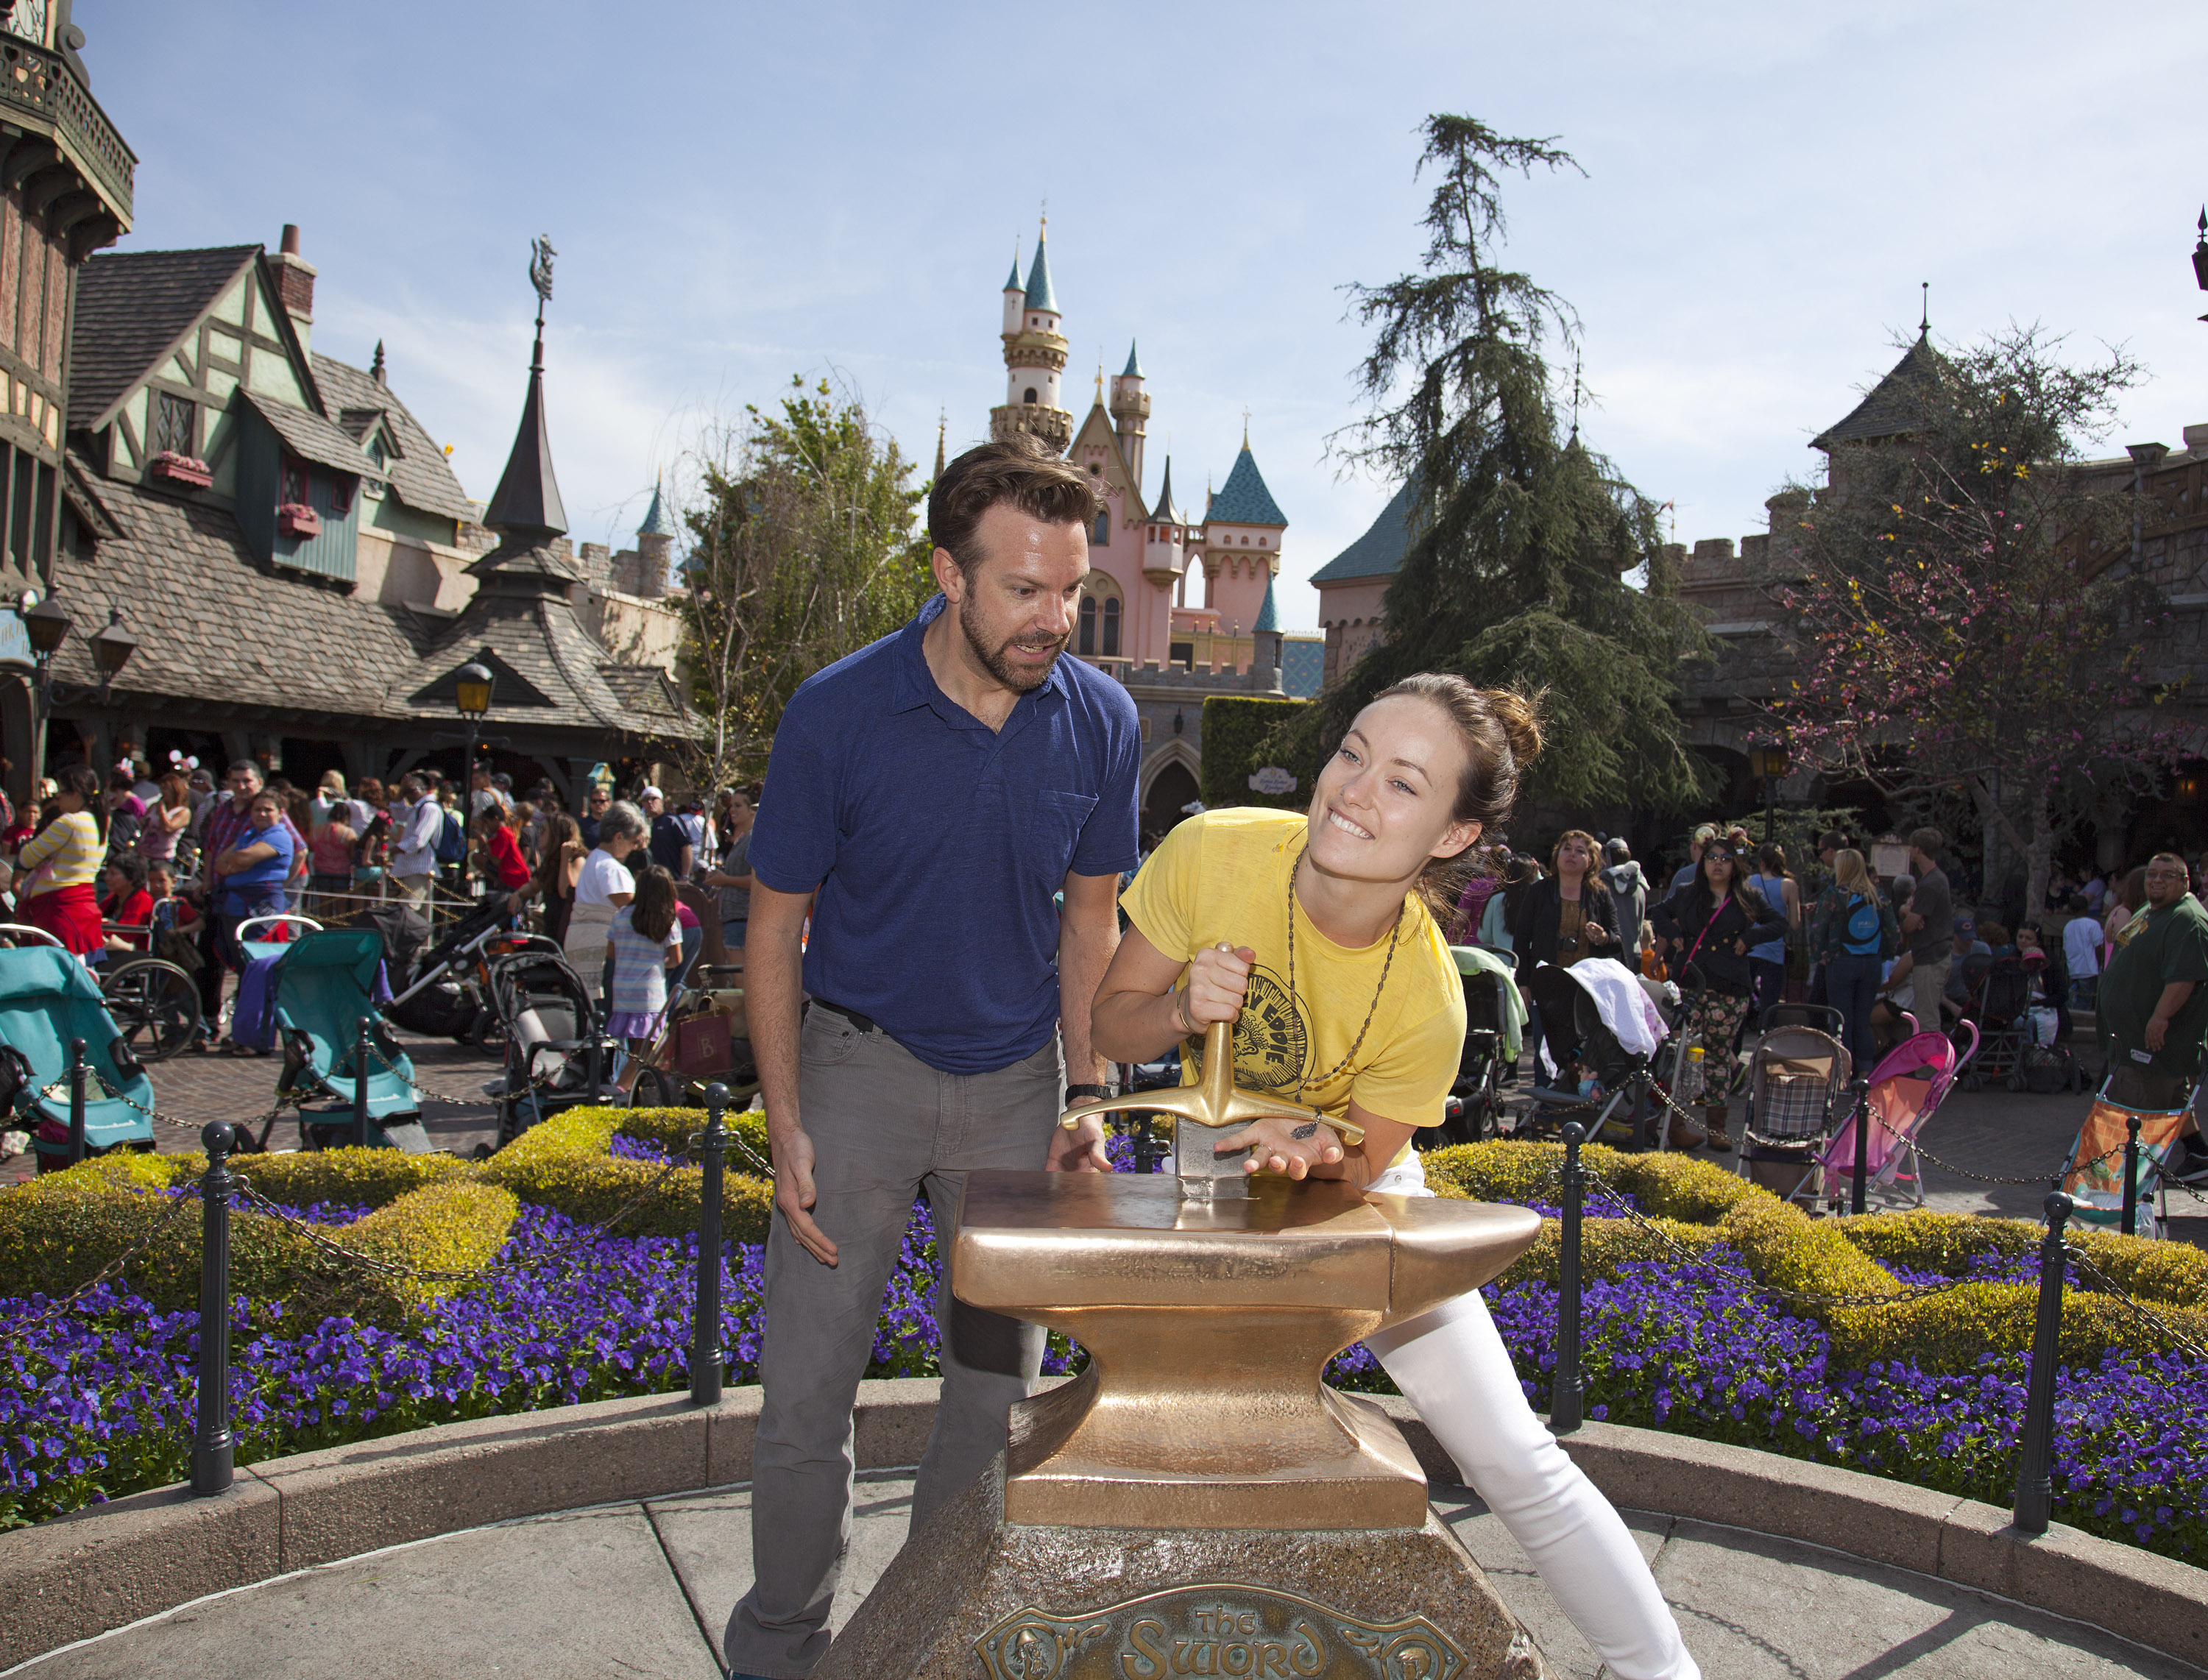 In this handout photo provided by Disney Parks, Newly-engaged couple Jason Sudeikis and Olivia Wilde try their luck at removing the “Sword in the Stone” at Disneyland park in Anaheim on March 26, 2013 in Anaheim, California. (GETTY)